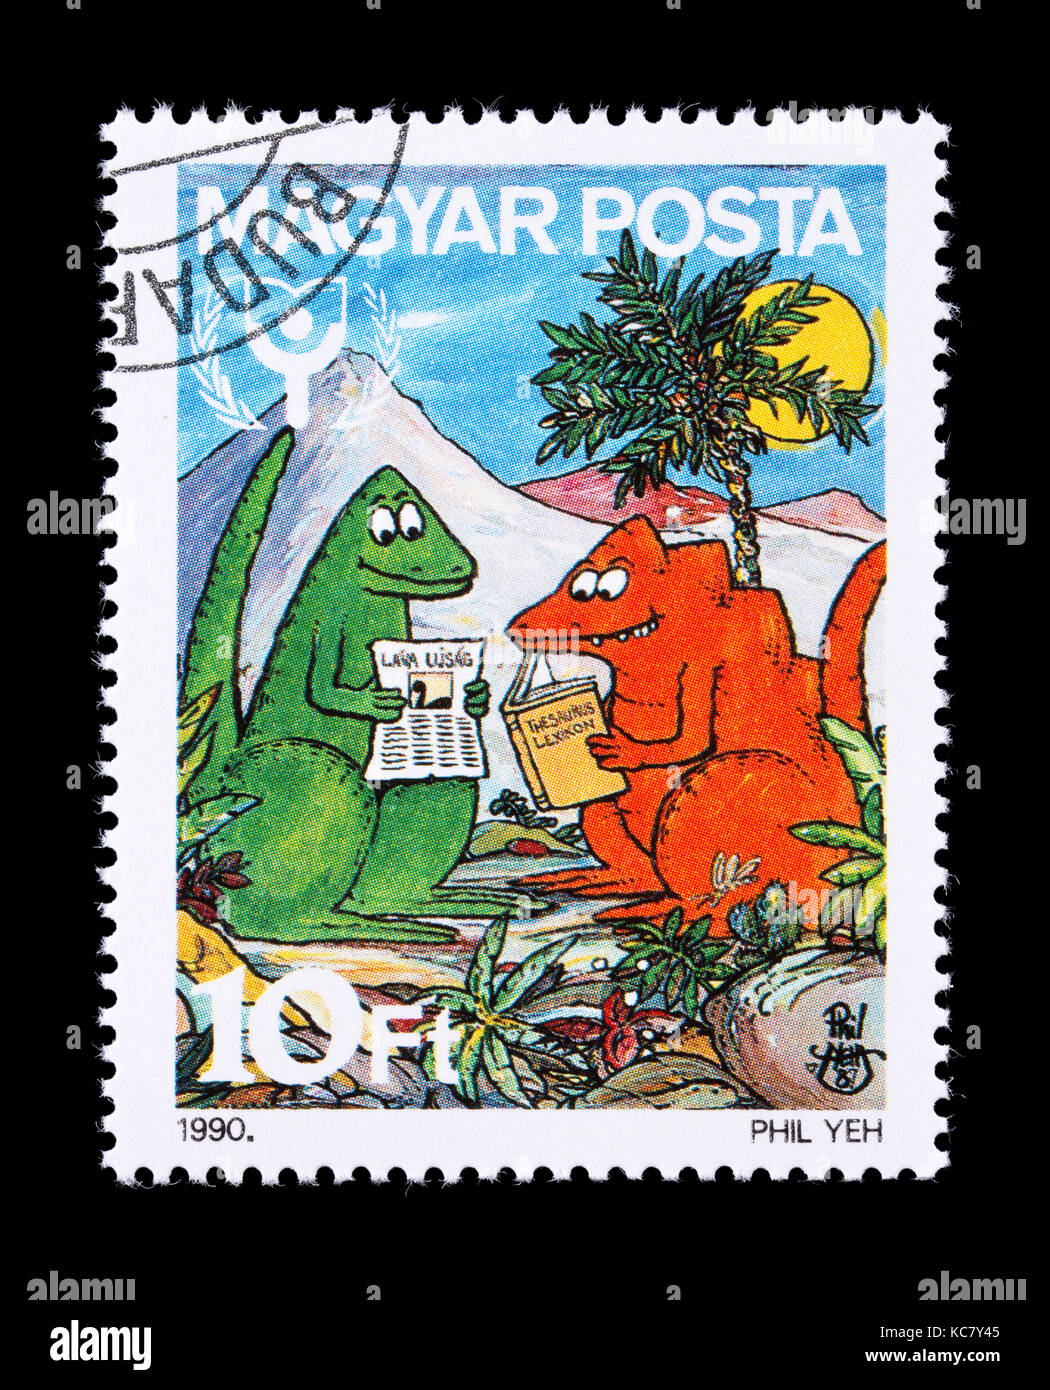 Postage stamp from Hungary depicting dinosaurs reading, International Literacy Year. Stock Photo